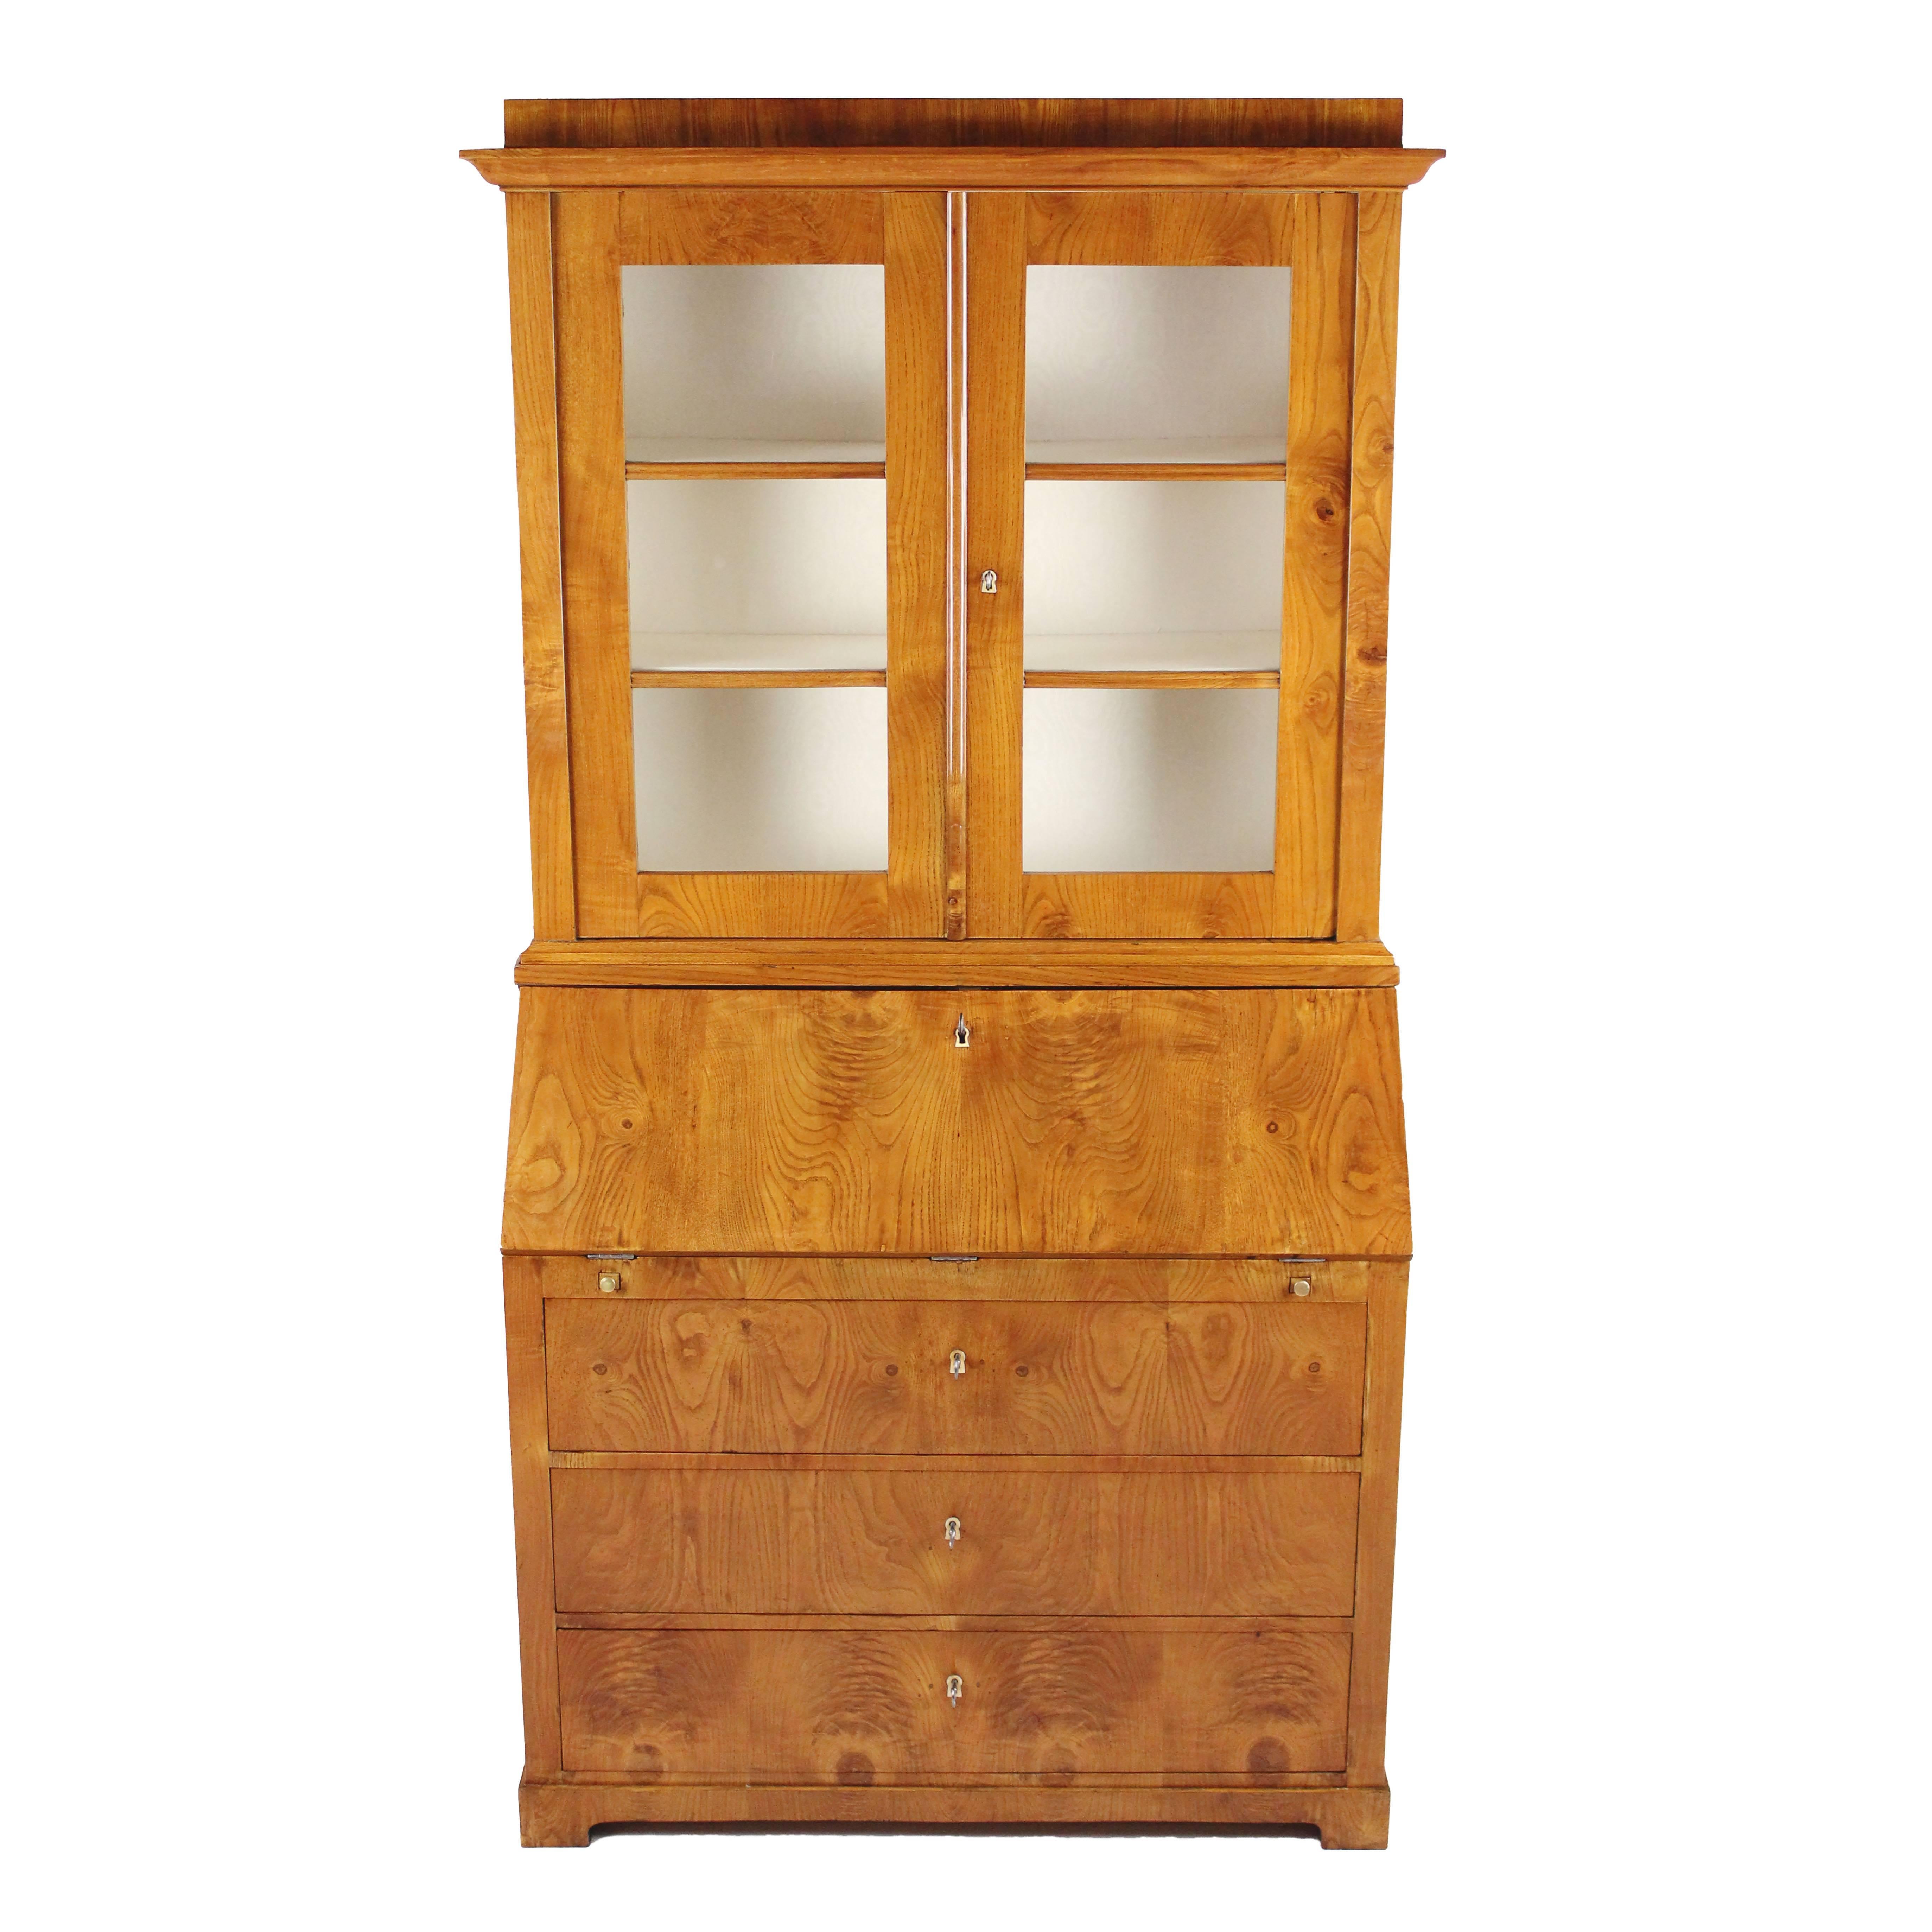 Secretary, circa 1820-1830
Ashwood
Three drawers in the bottom
Nice inner life with fields and pushes
Writing surface with leather insert
Two-door glazed upper top with shelves
Restored residential-ready state
French shellac hand